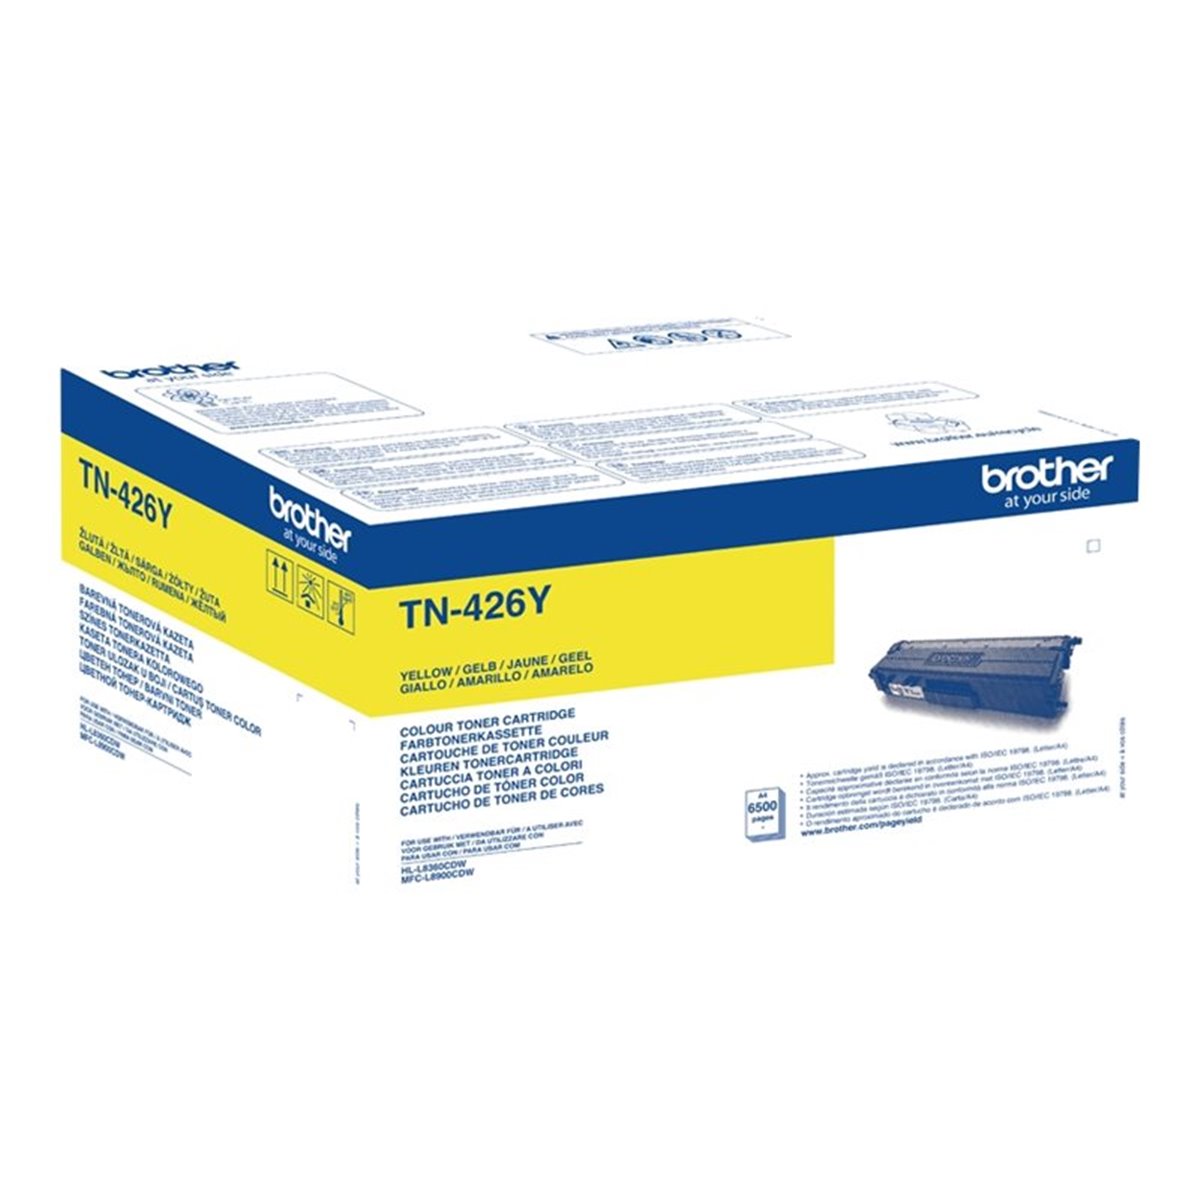 TN426Y Toner Cartridge Yellow Super High Capacity 6.500 pages for HLL8260CDW, L8360CDW